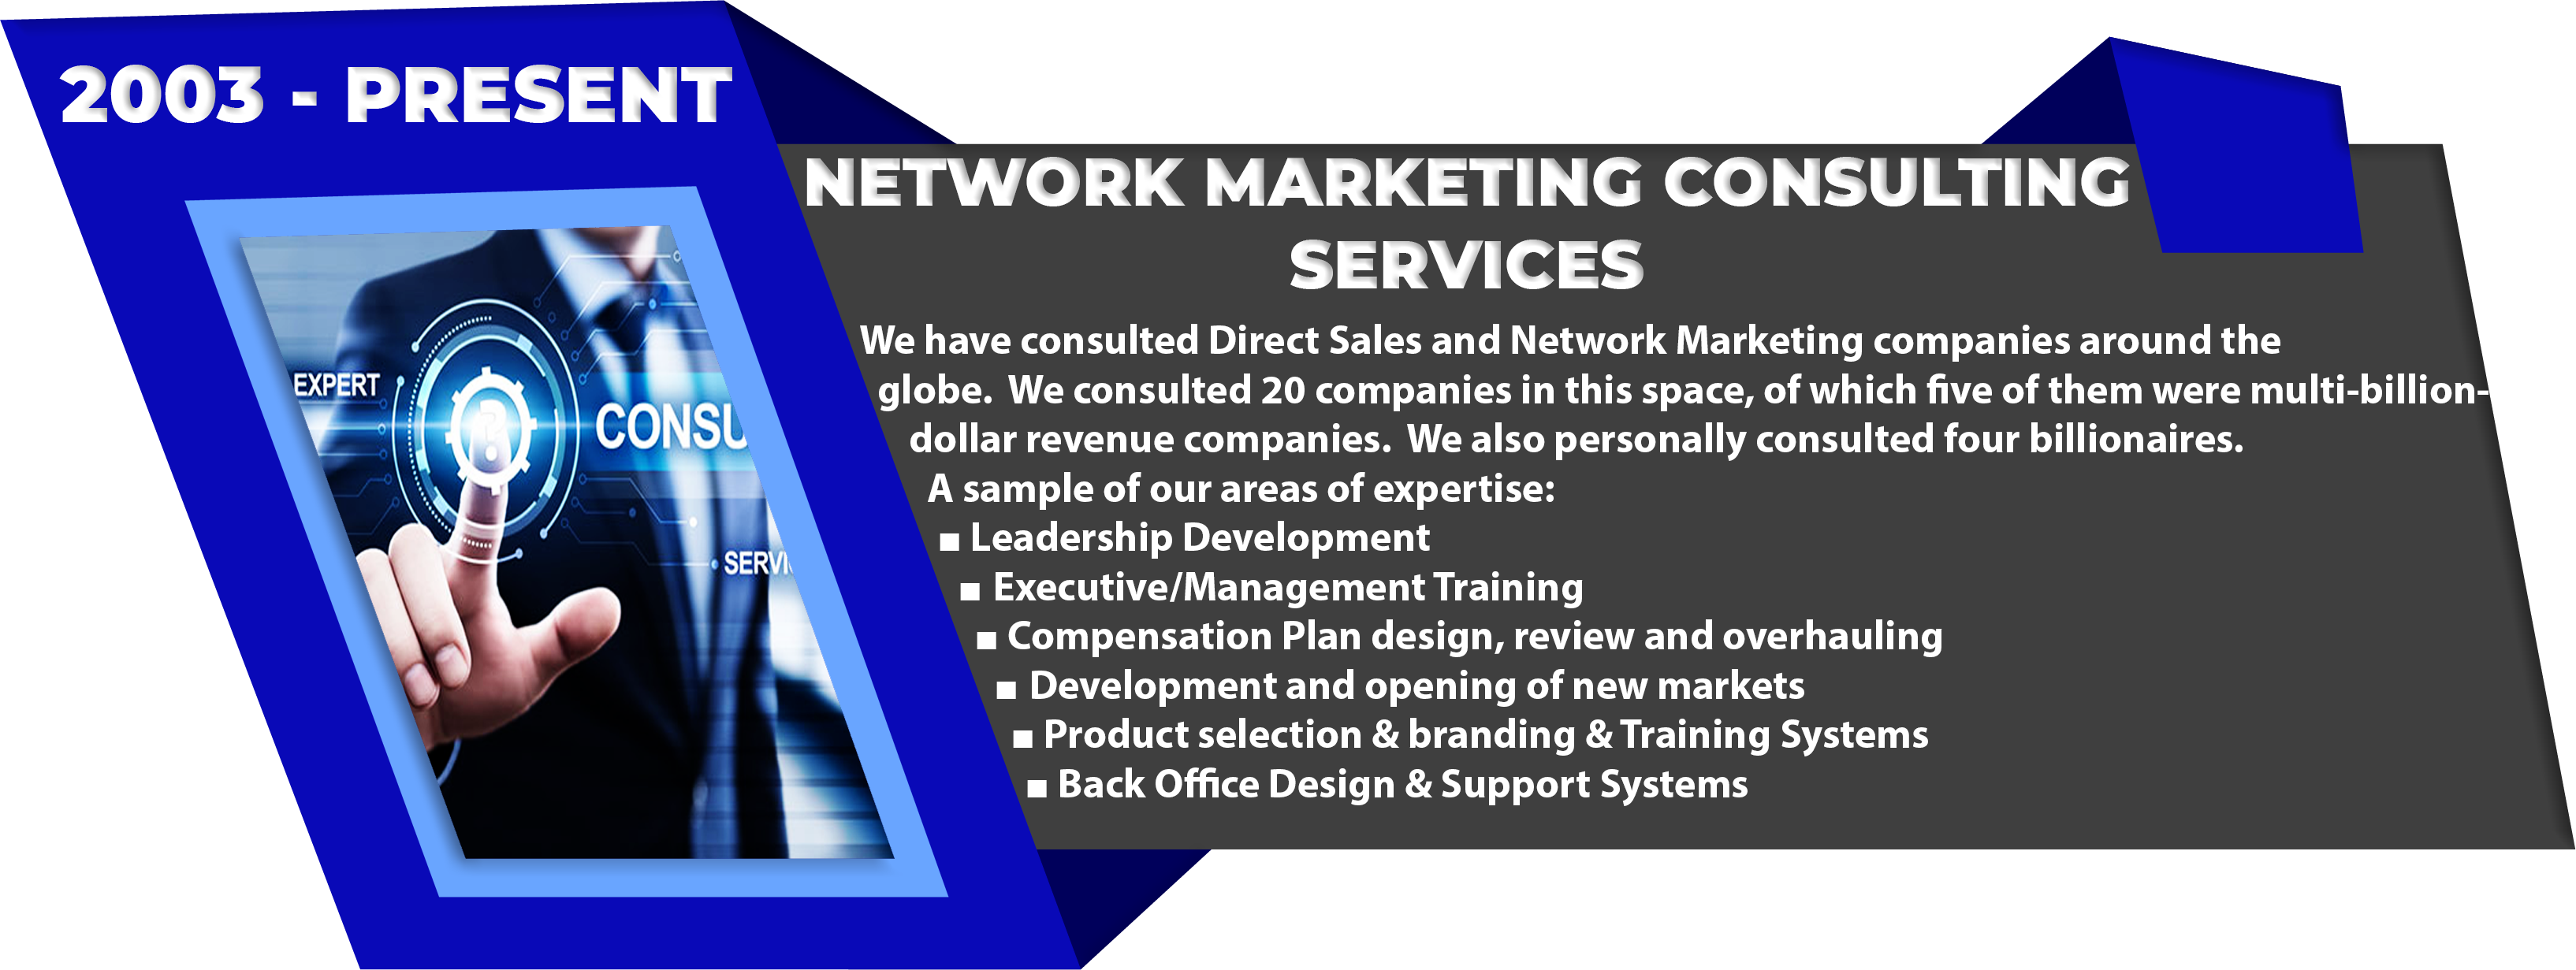 Network-Marketing-Consulting-Services-2003-–-Present-1